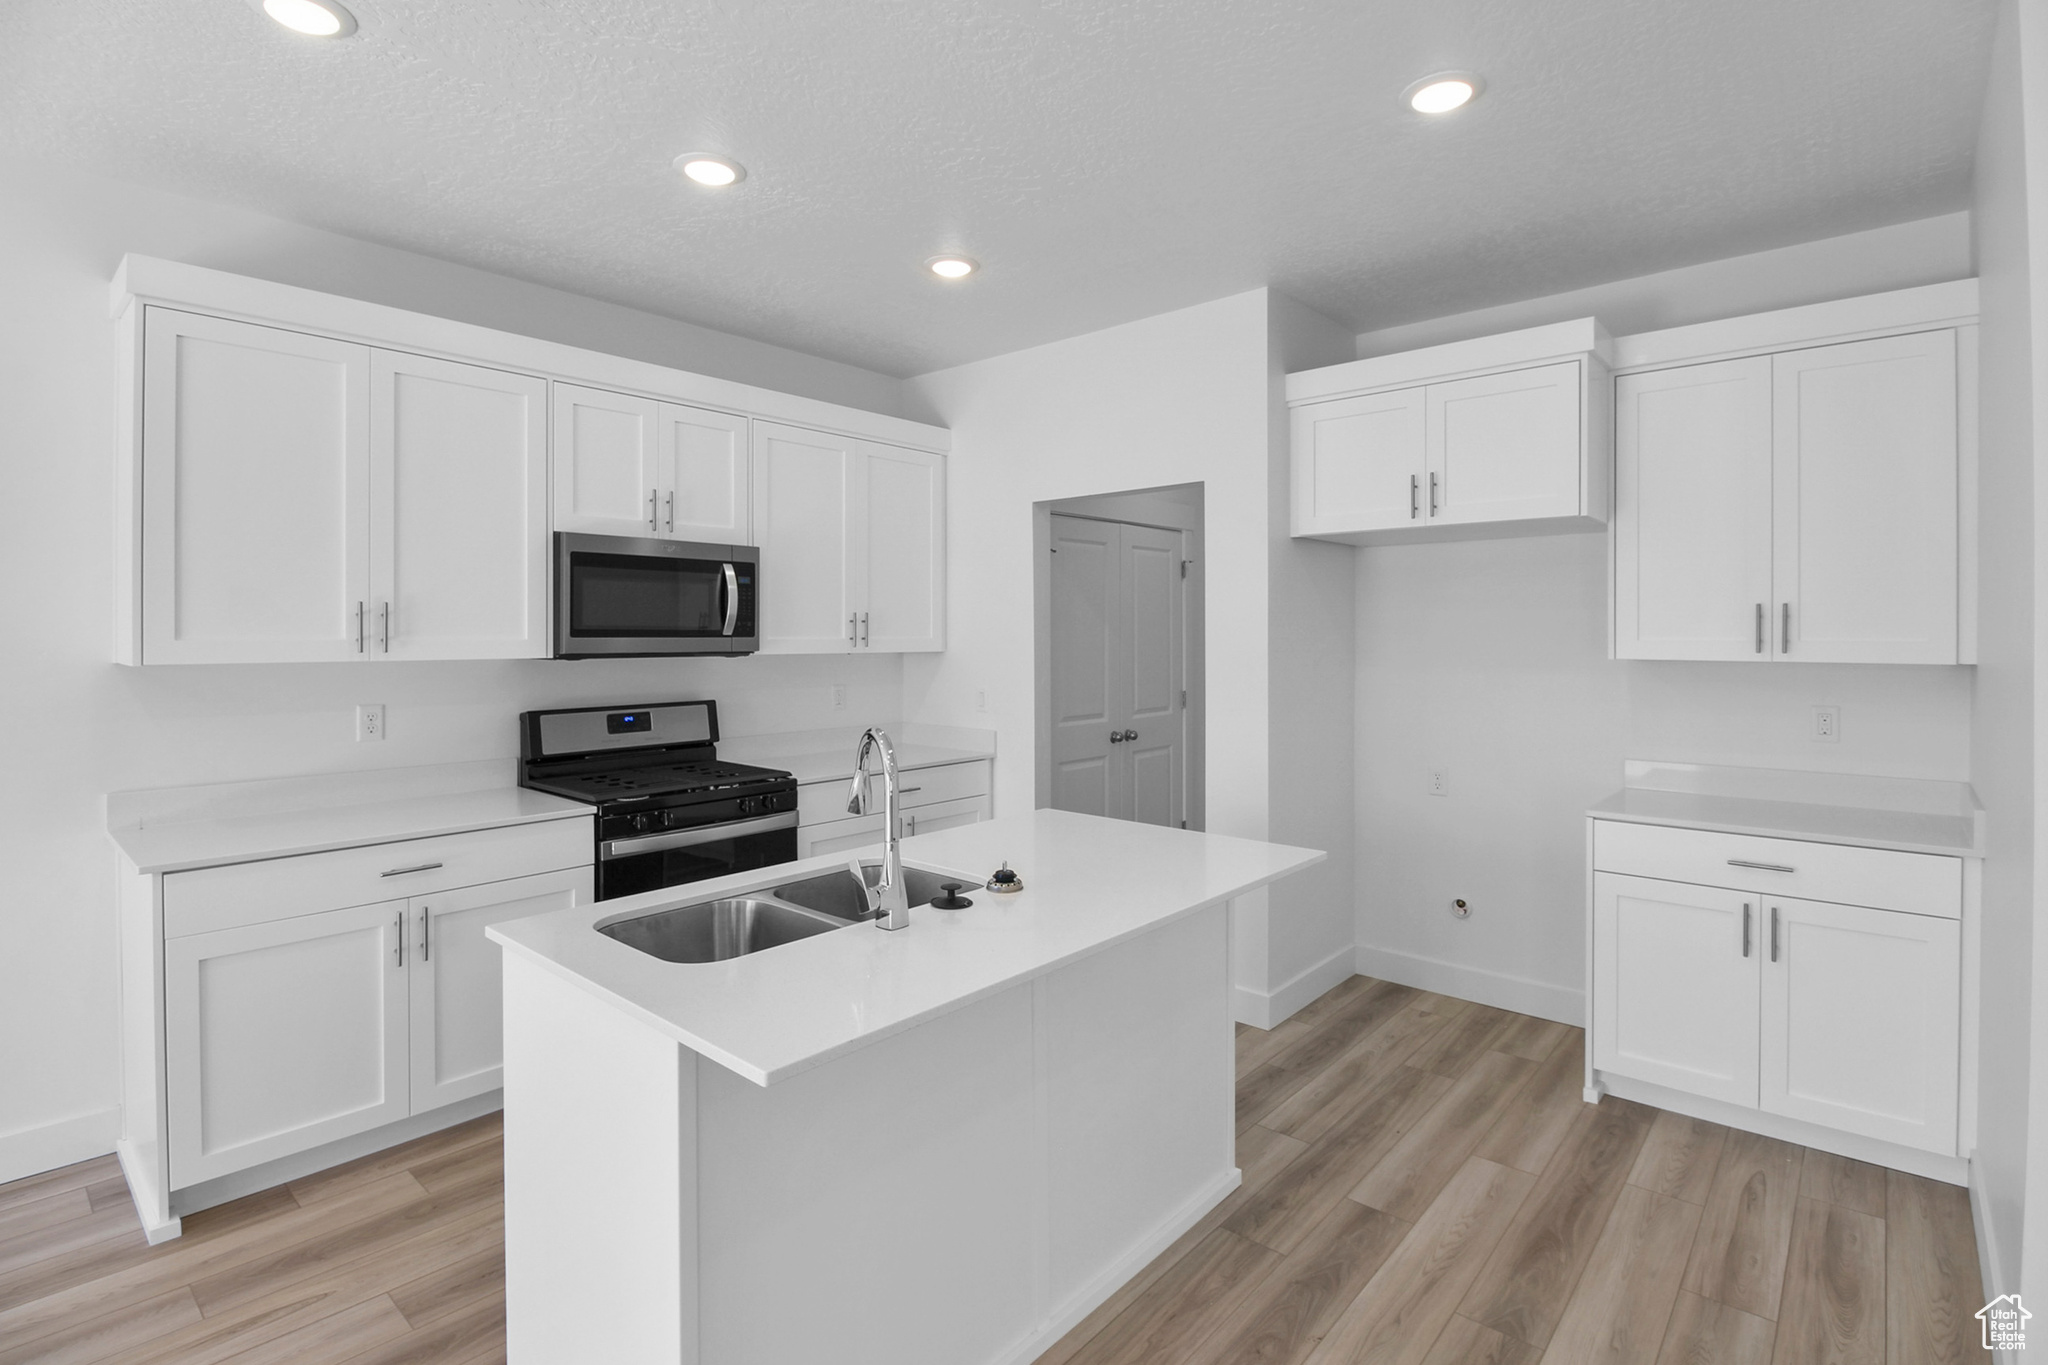 Kitchen featuring white cabinetry, a center island with sink, appliances with stainless steel finishes, light hardwood / wood-style flooring, and sink